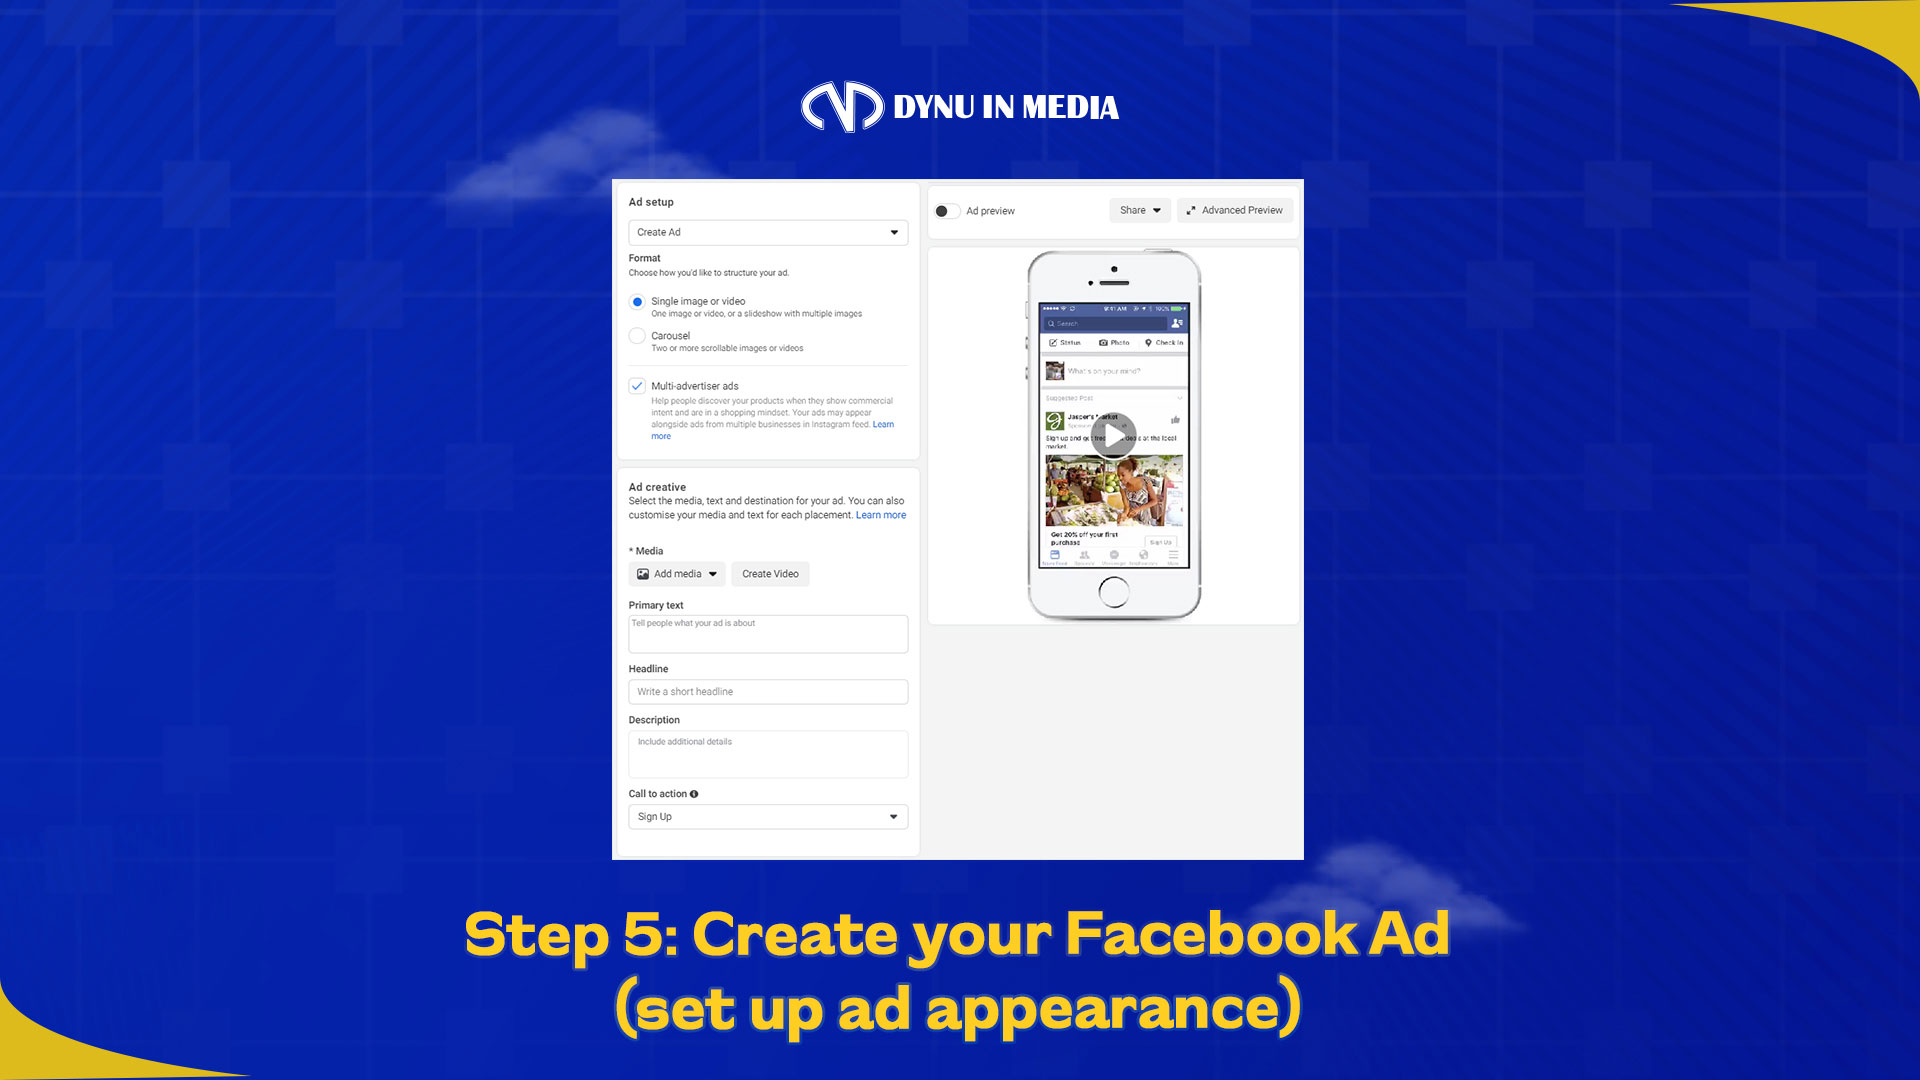 Step 5: Create Your Facebook Ad